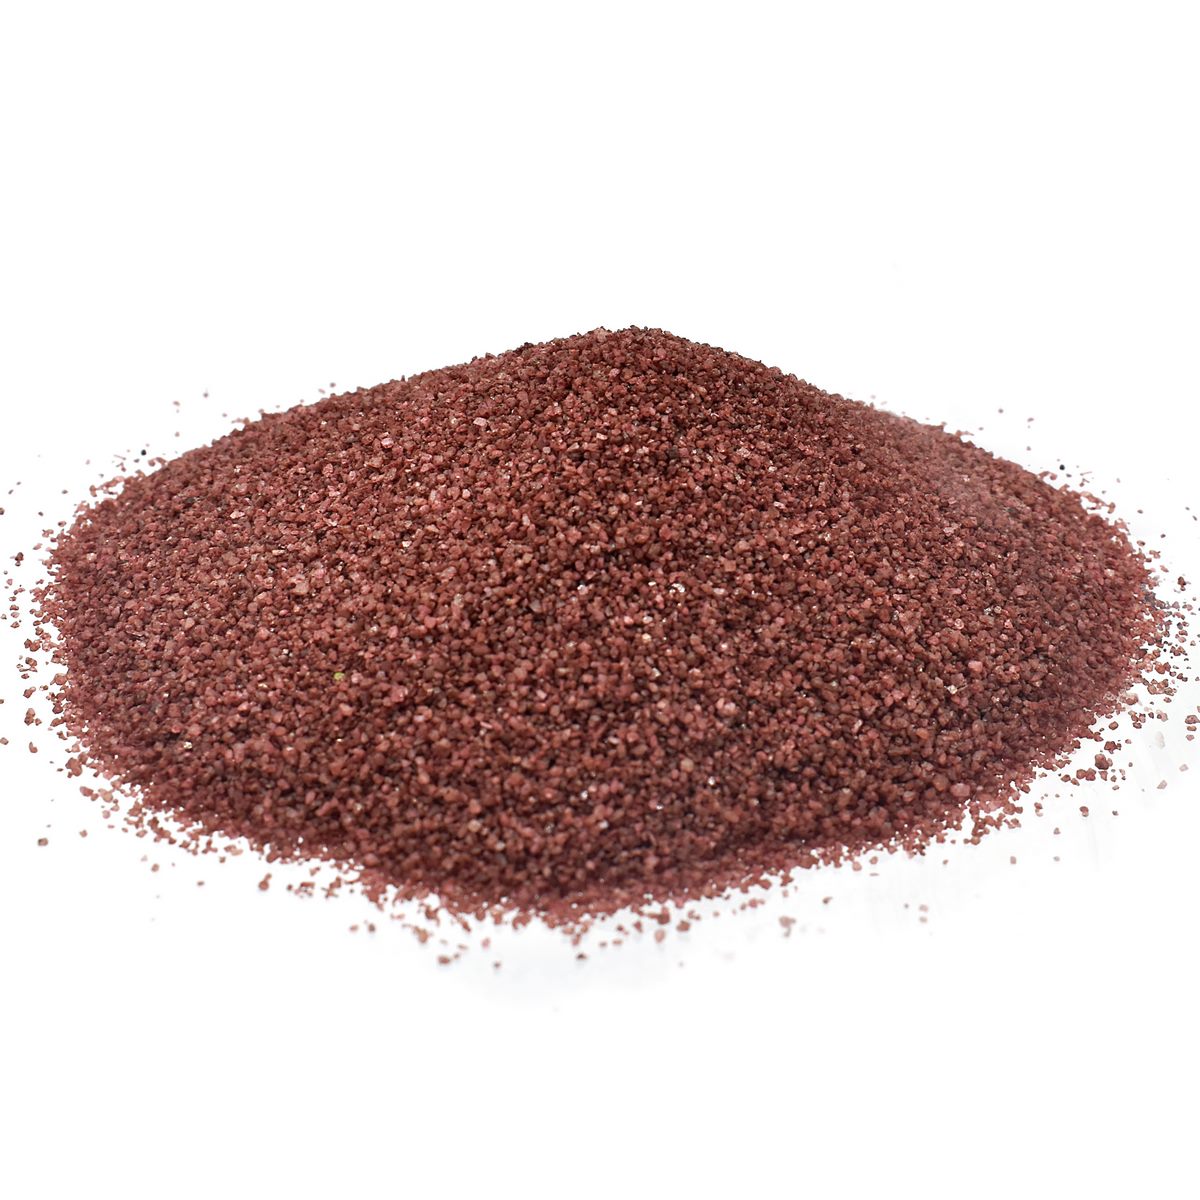 jags-mumbai Sand Jags Coloured Sand 160Gms Brown No 12 - Natural-Looking Craft Sand for DIY Projects